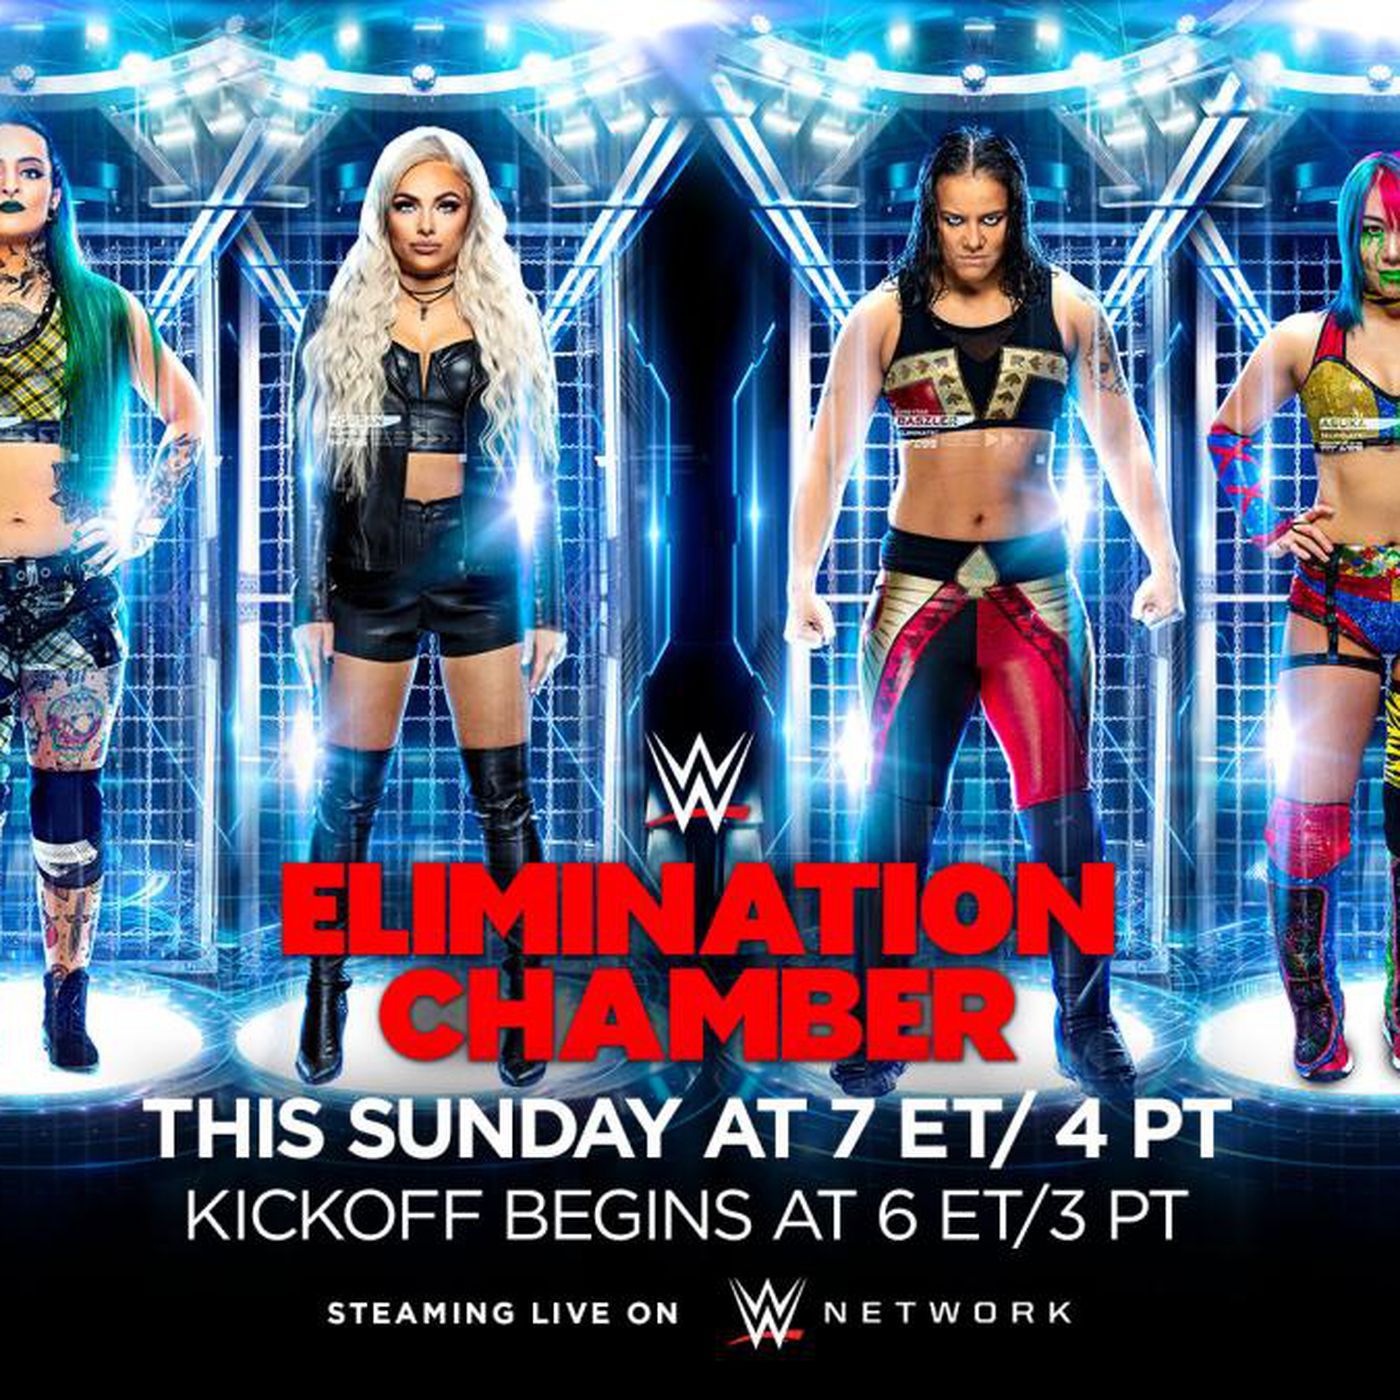 WWE Elimination Chamber 2020 predictions